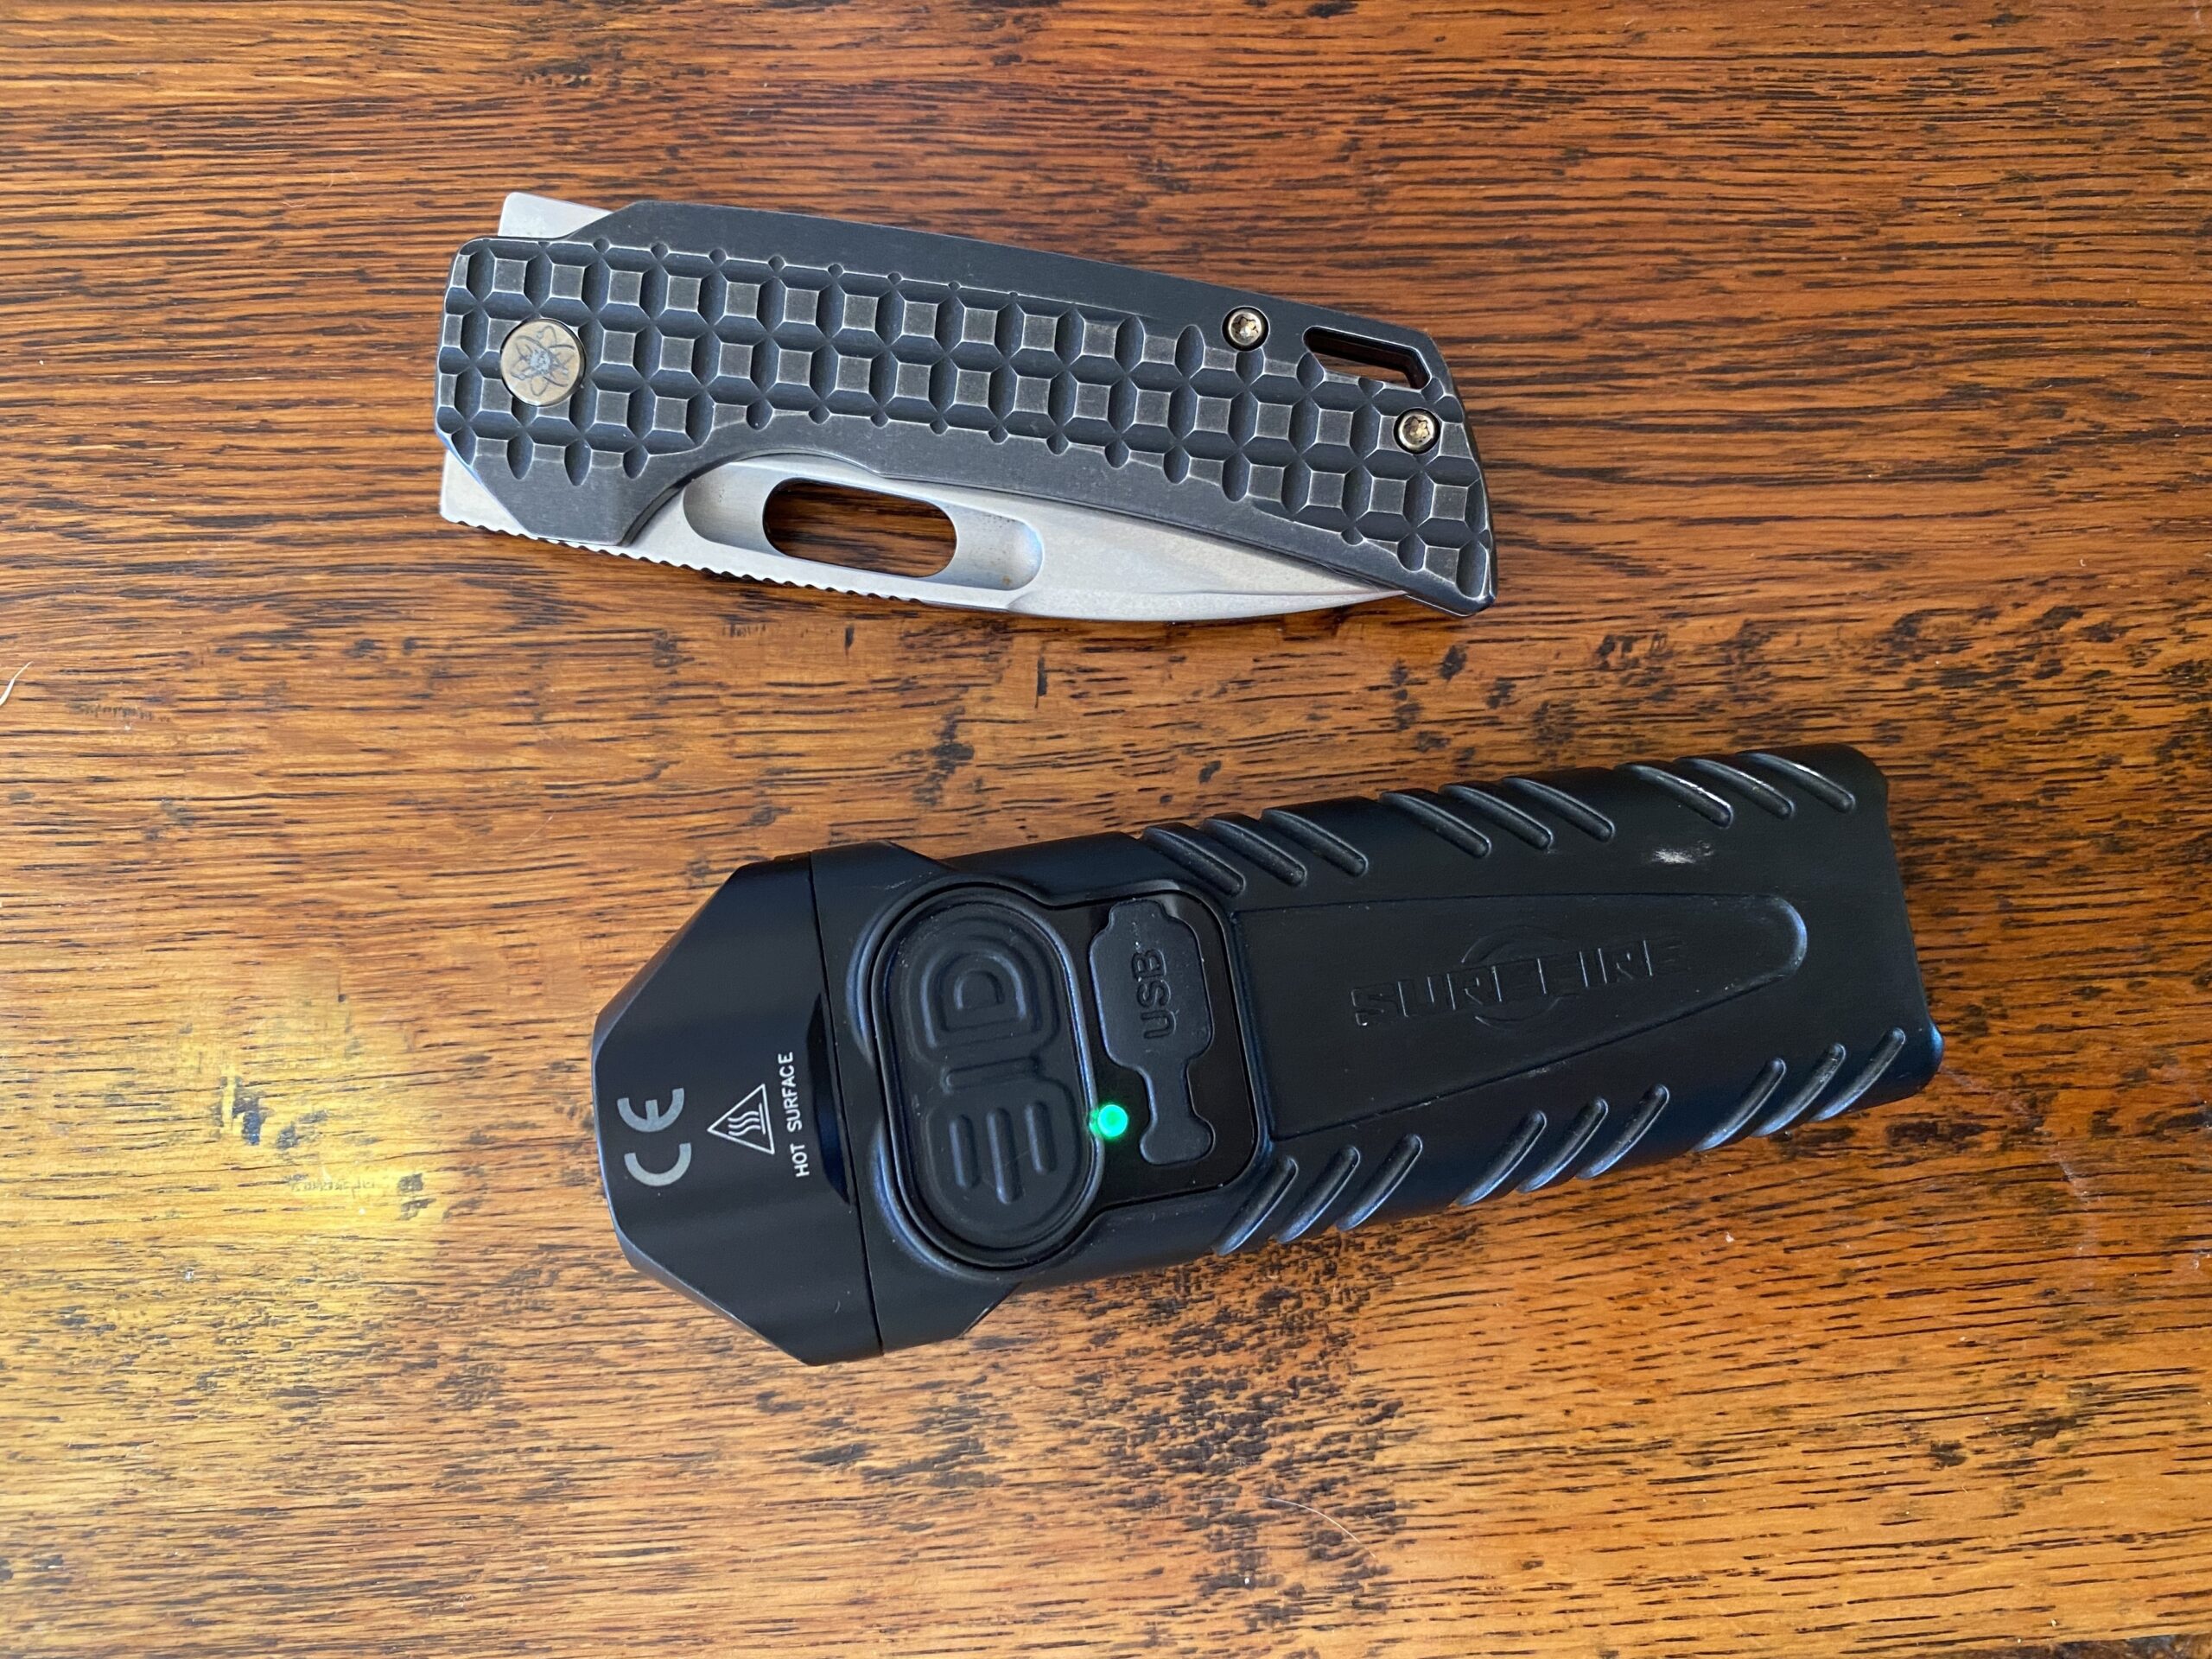 The best flashlight overall is the Surfire Stiletto